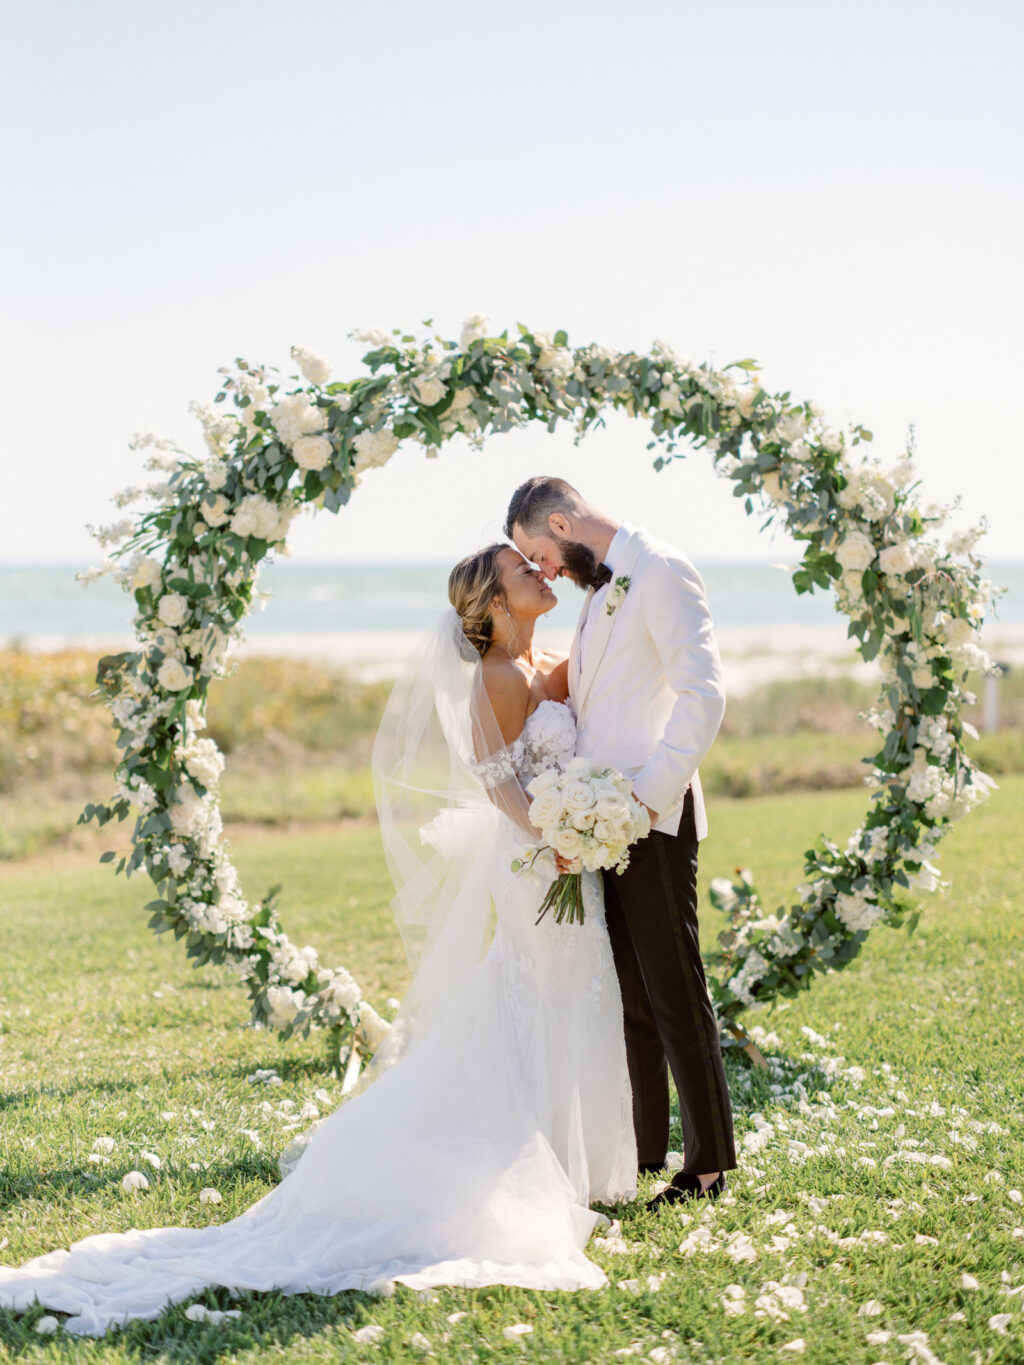 Waterfront Wedding Ceremony, Bride and Groom at Modern Circle Floral Arch with Classic White and Greenery Florals | Sarasota Wedding Venue The Resort at Longboat Key Club | South Beach Lawn